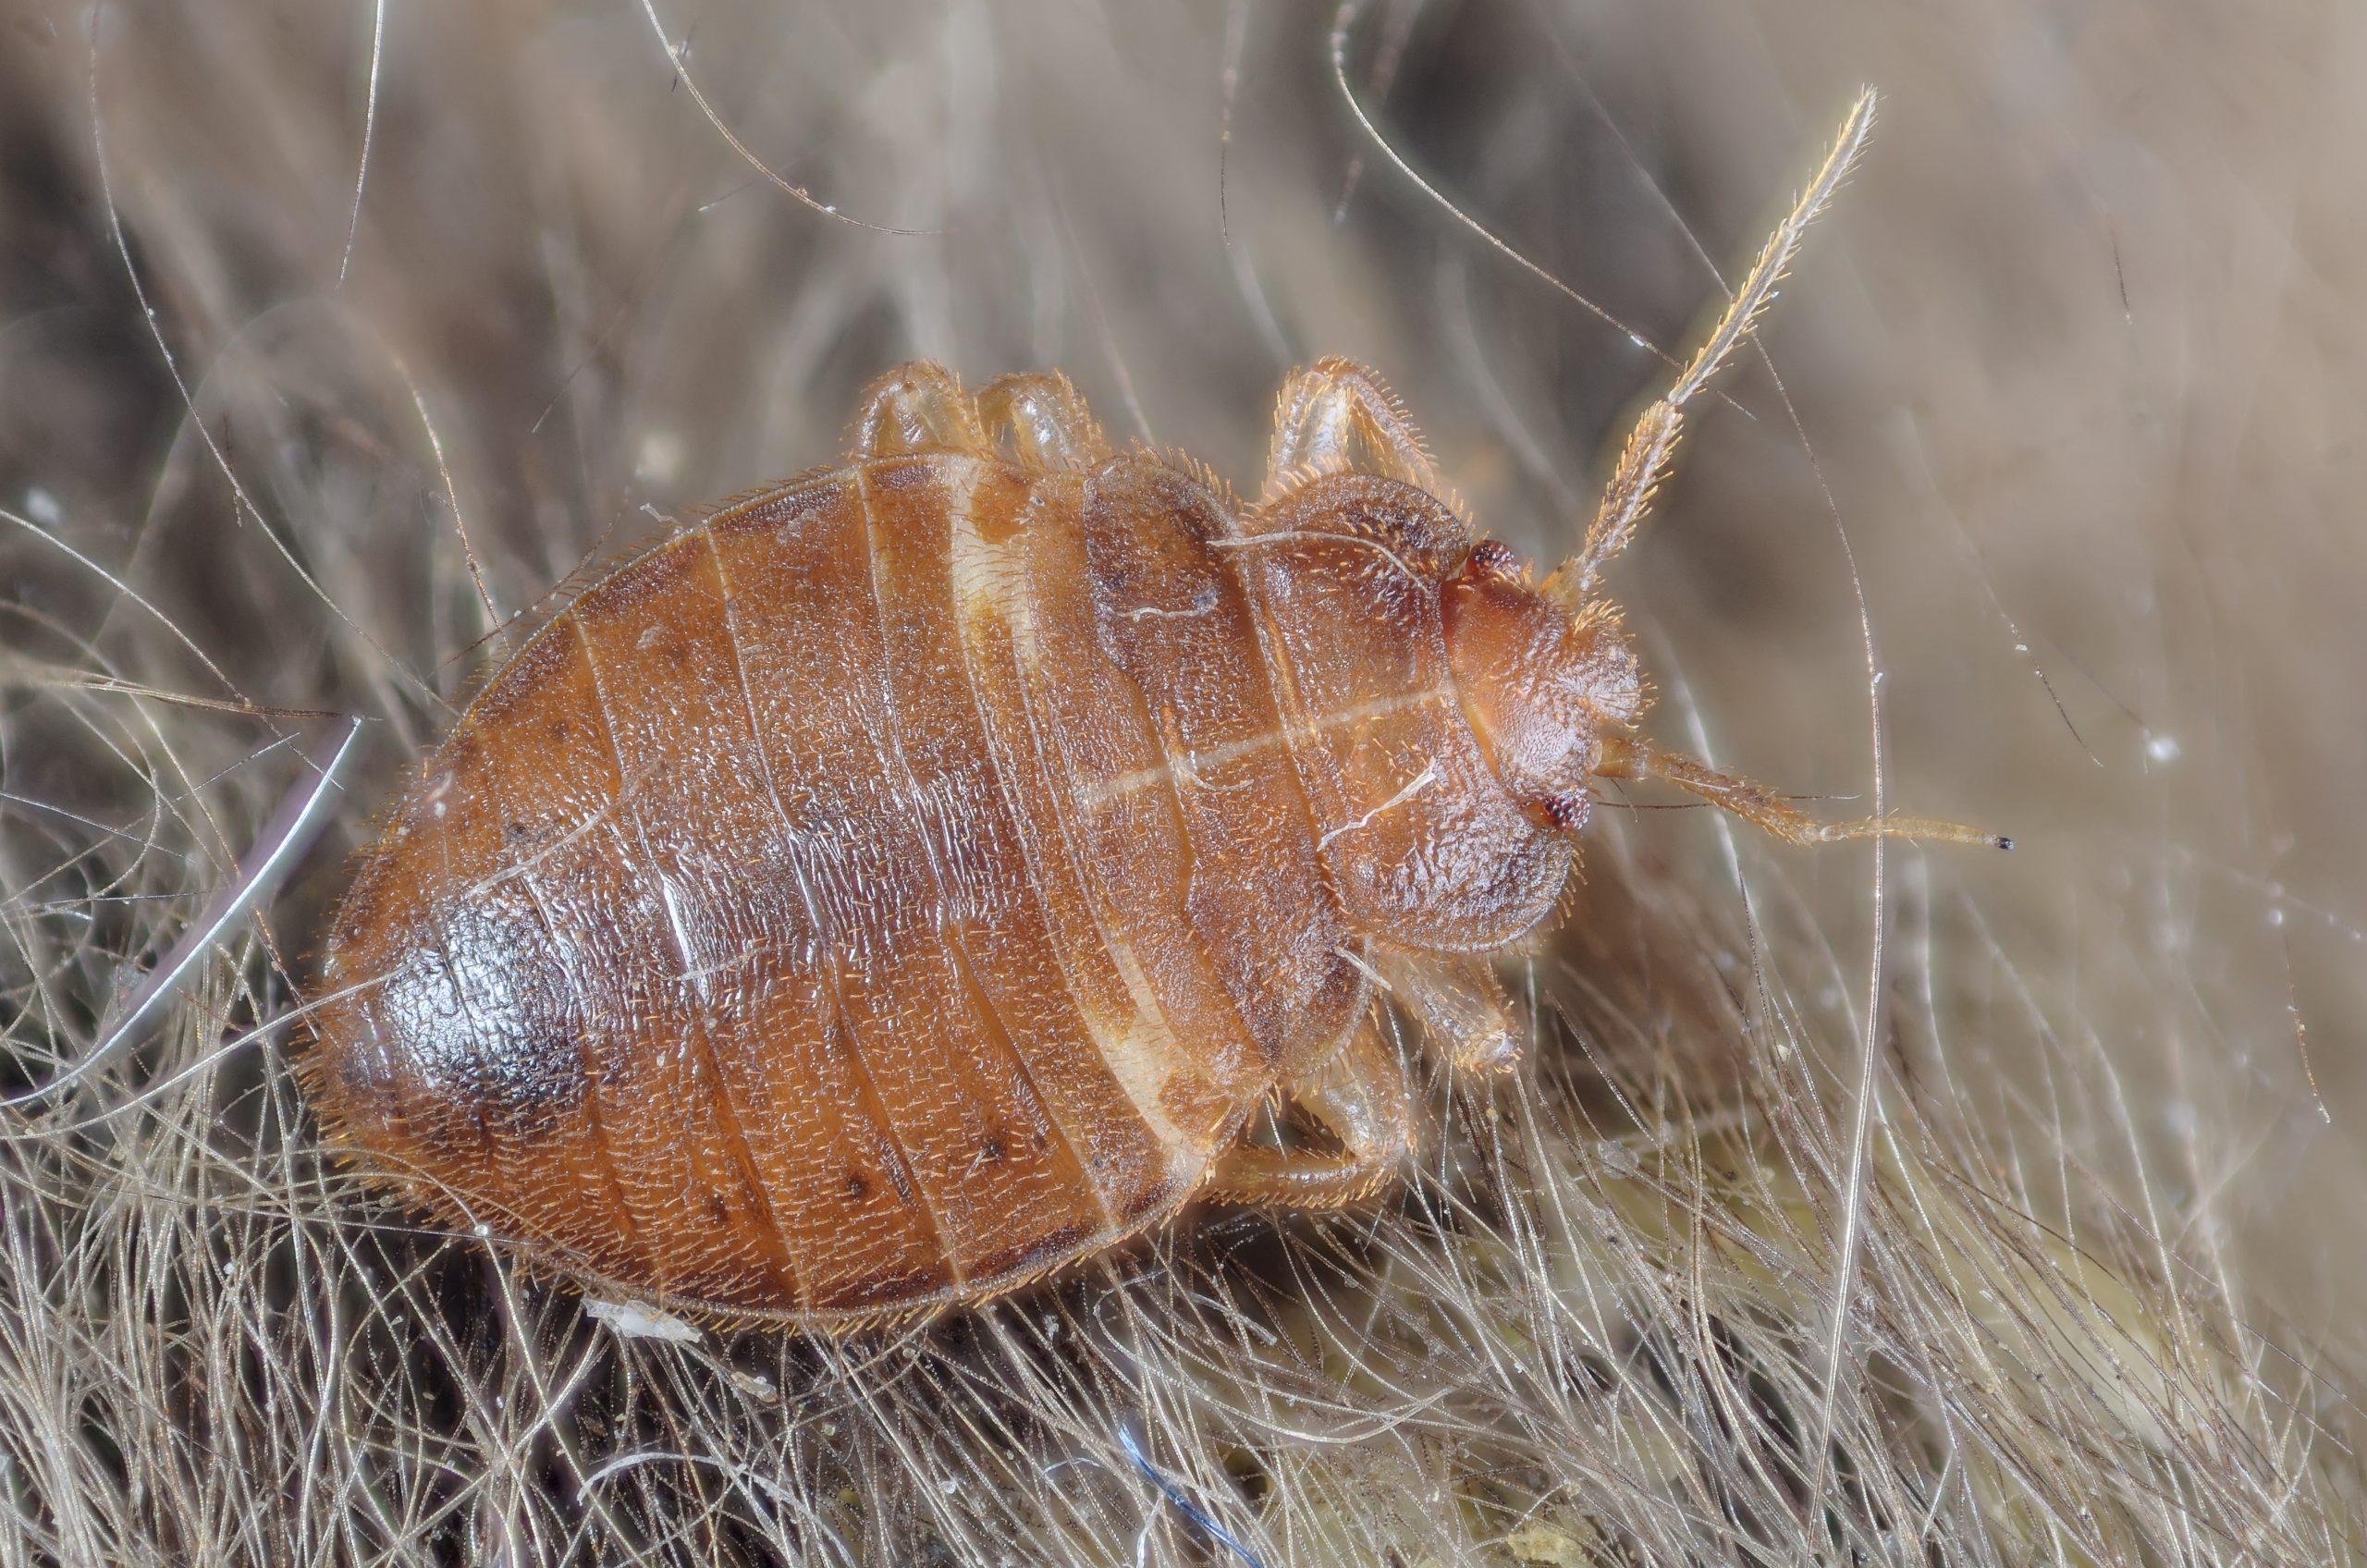 Common Myths About Bed Bugs